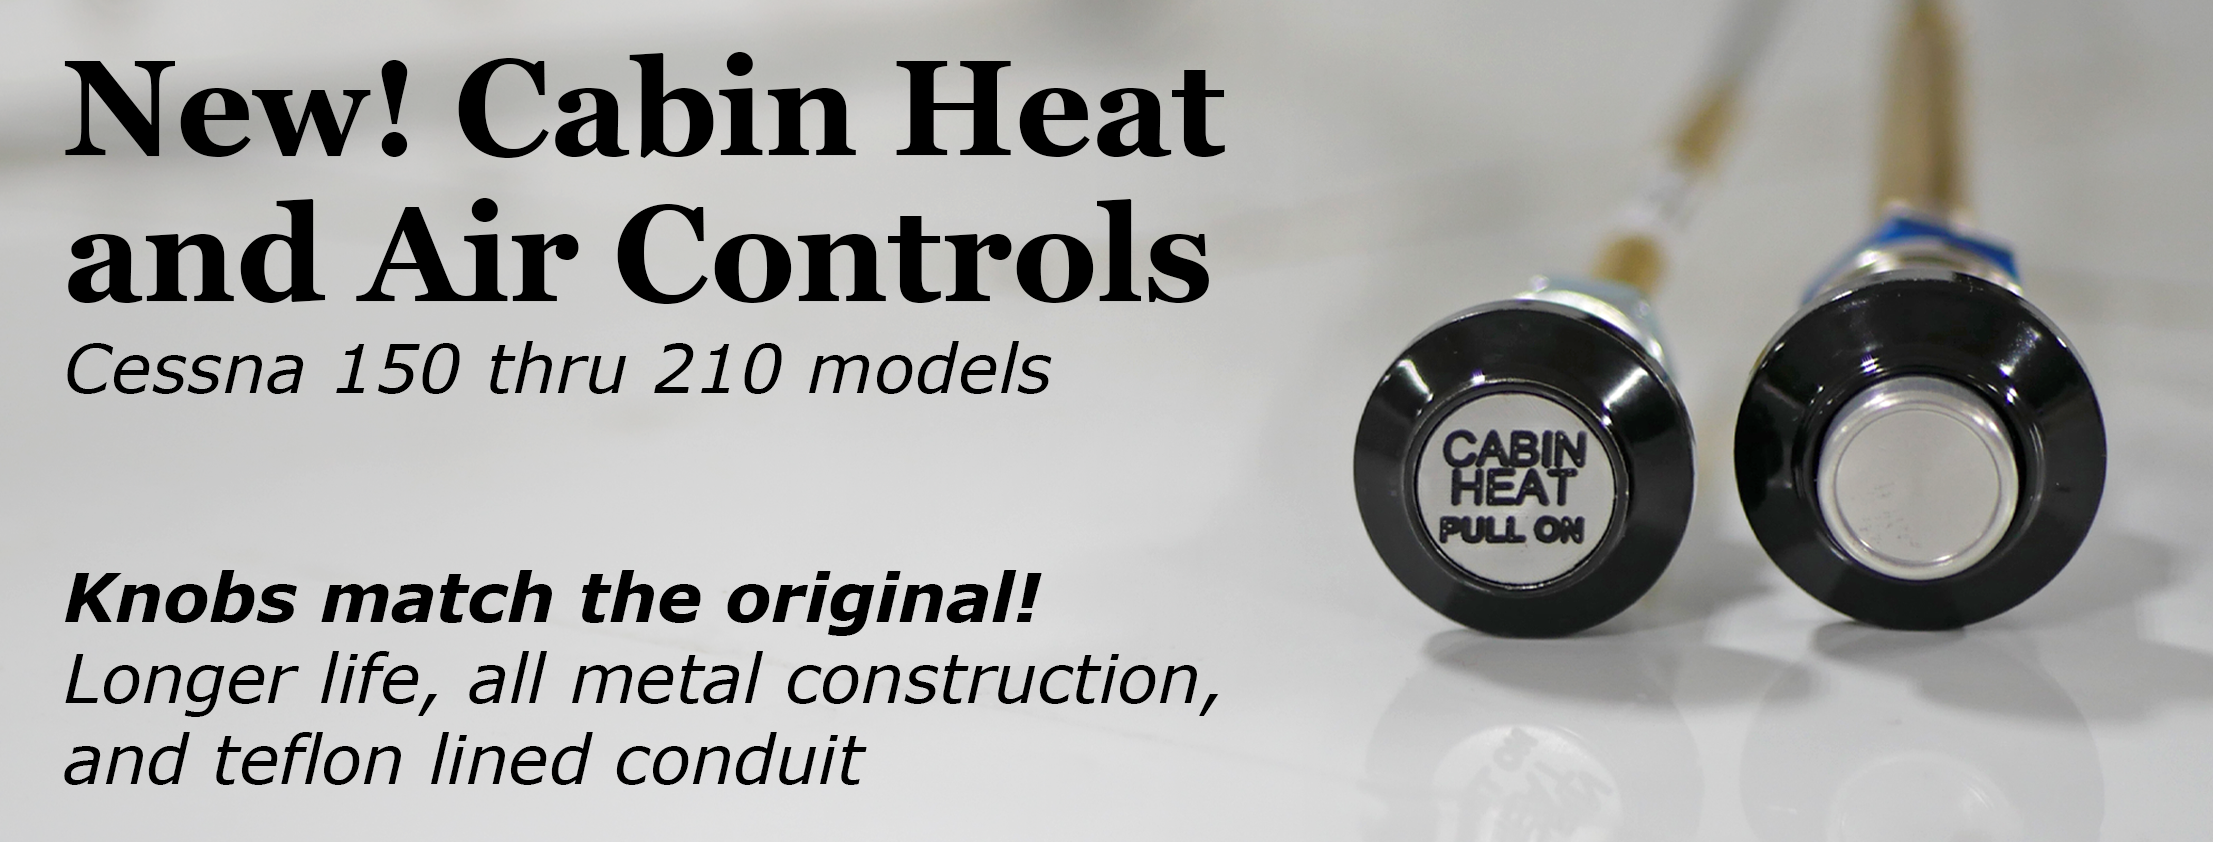 New Cabin Heat and Air Controls